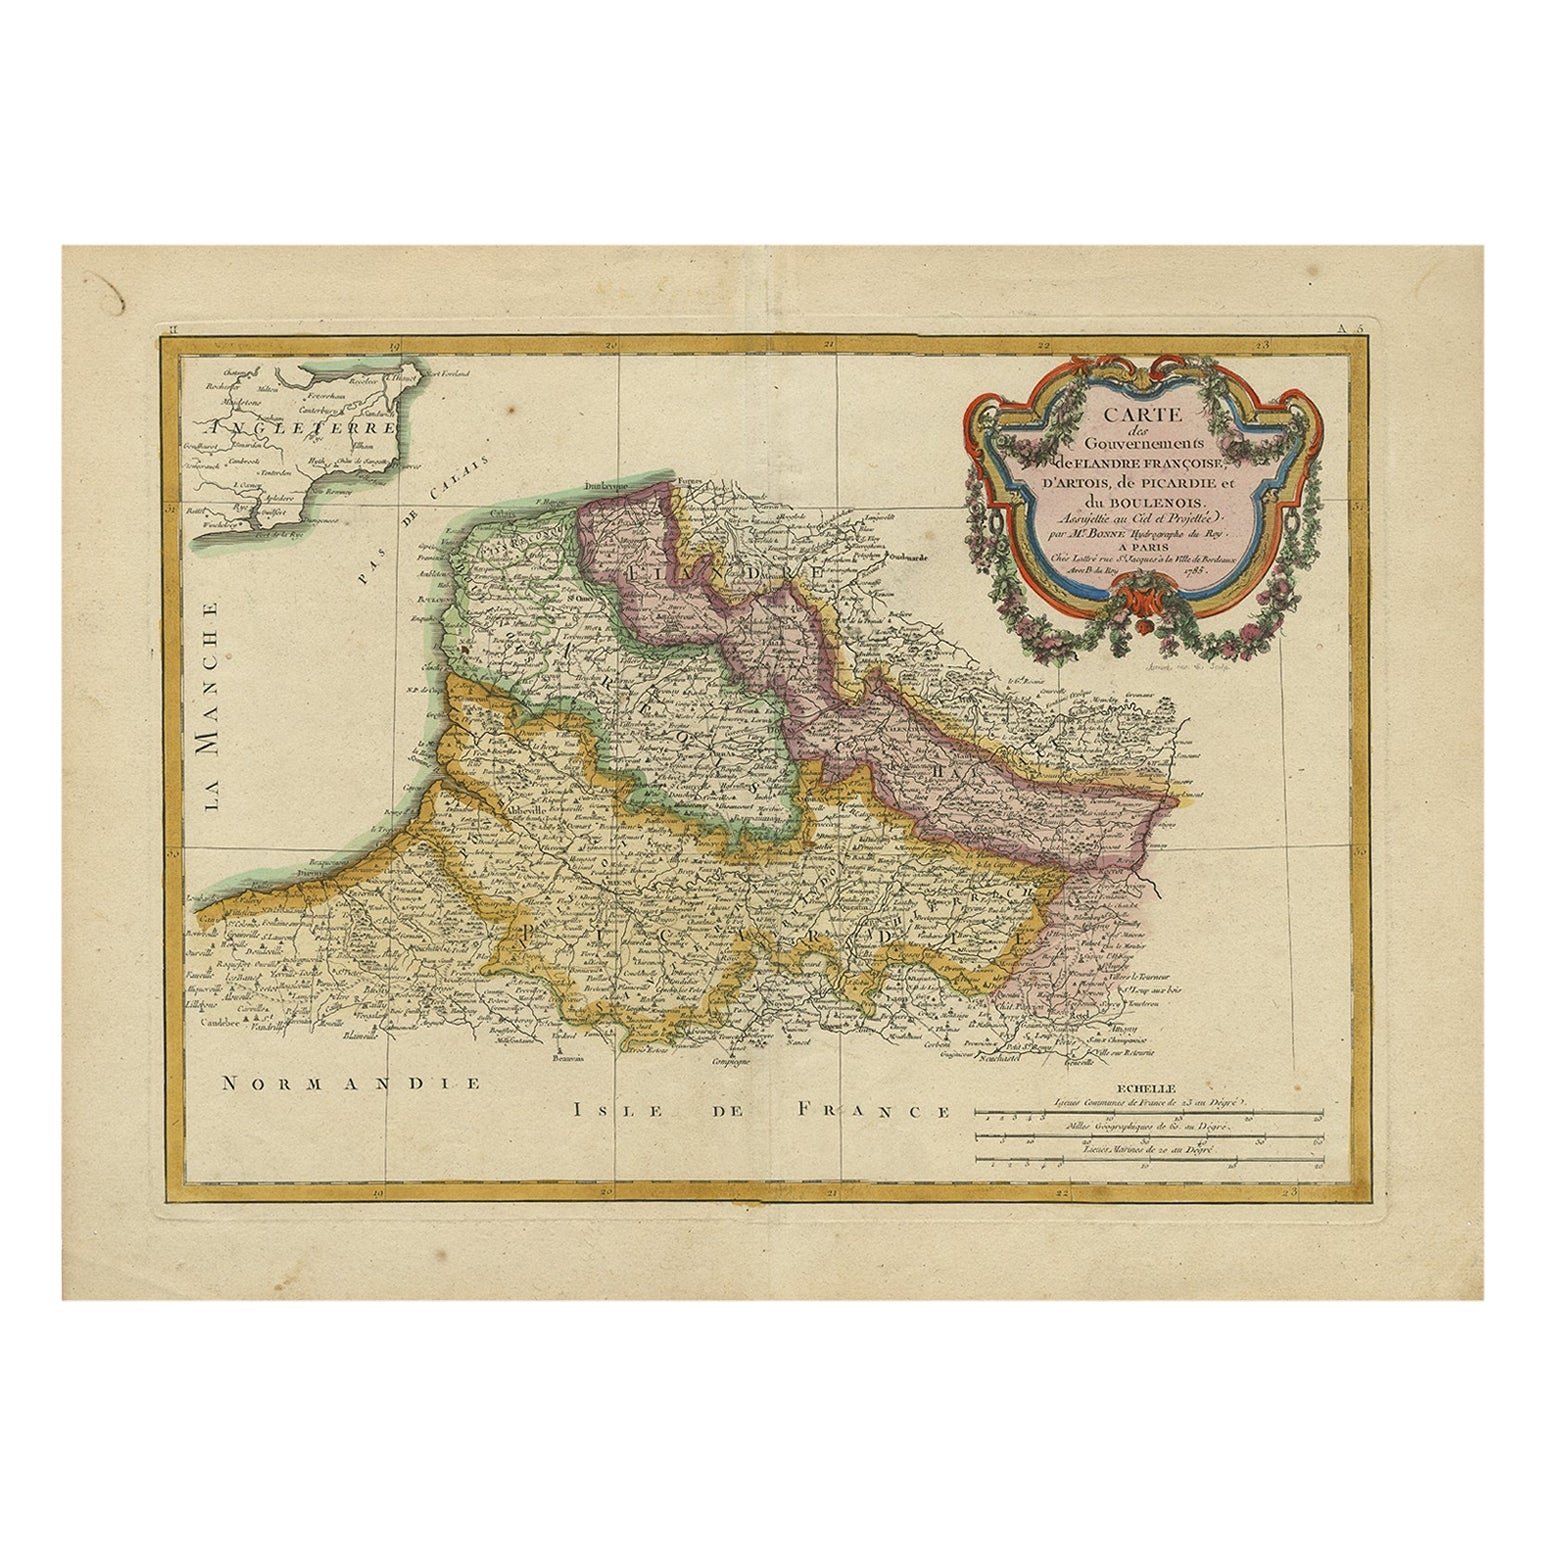 Antique Map of Picardy, Aroits and French Flanders by Bonne, c.1780